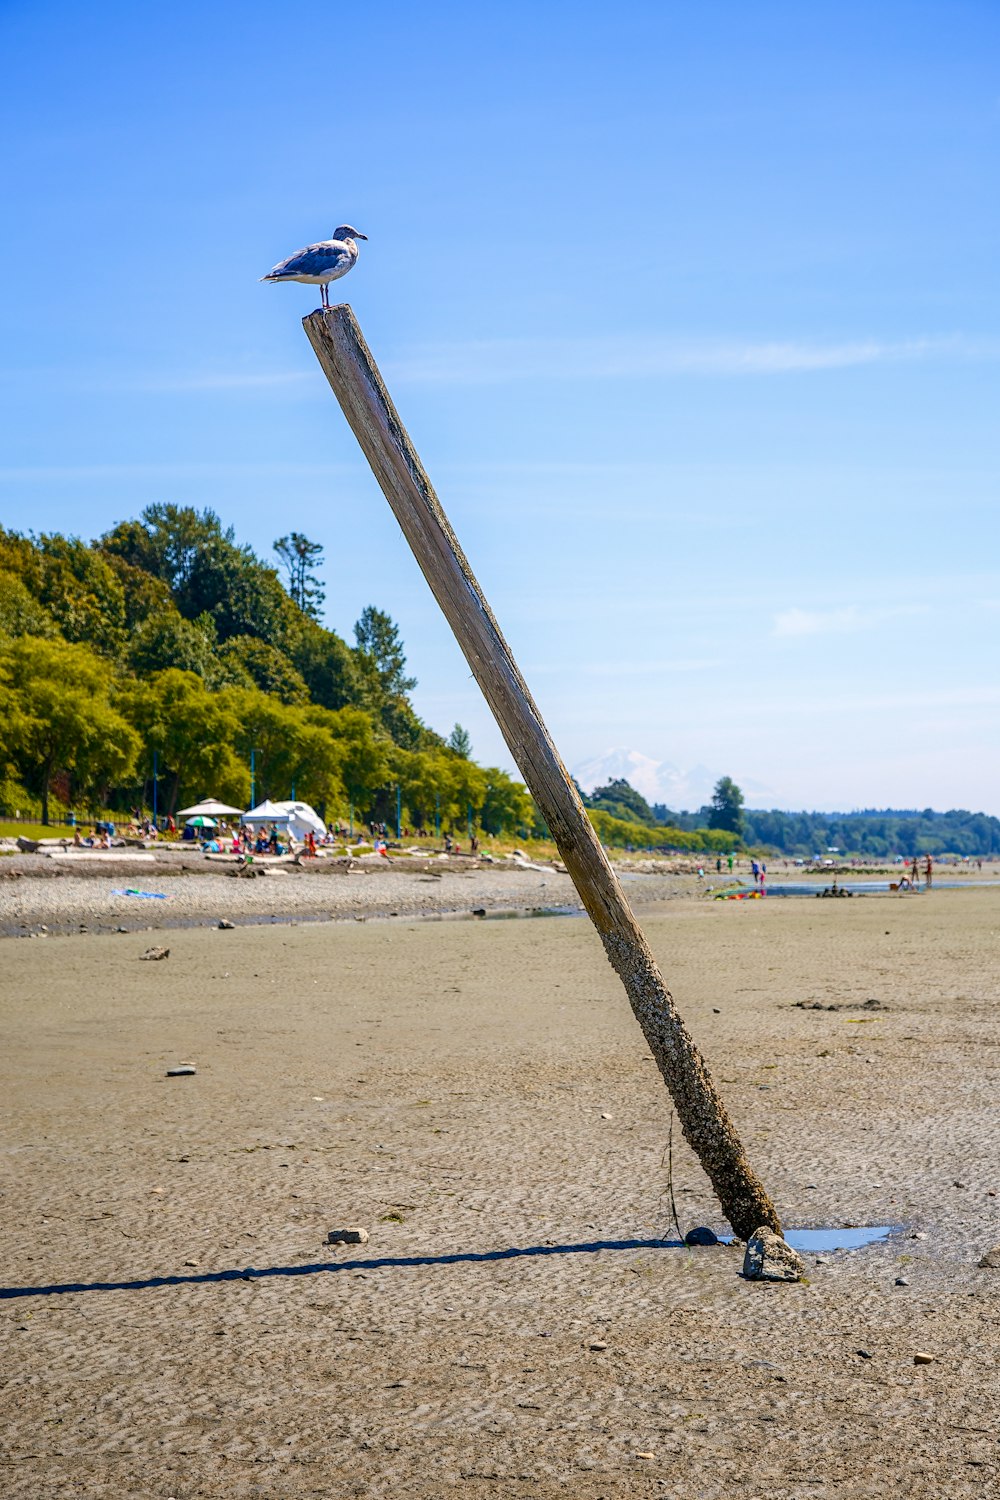 a bird sitting on top of a wooden pole on a beach